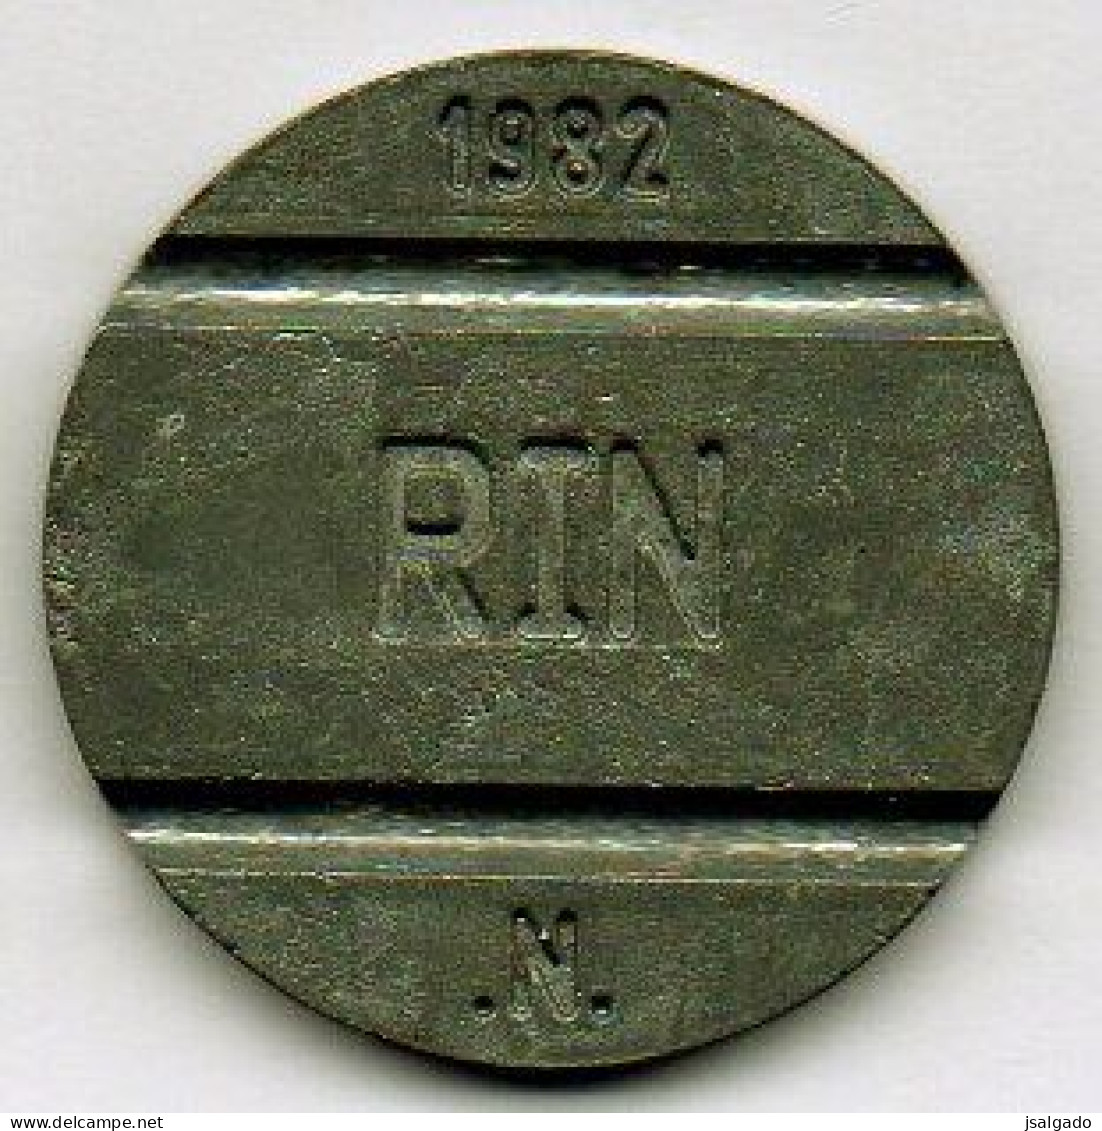 Perú  Telephone Token    1982  (g)  RIN  (g)  .N. With Two Dots   /  CPTSA  (g)  Telephone In Circle - Monétaires / De Nécessité